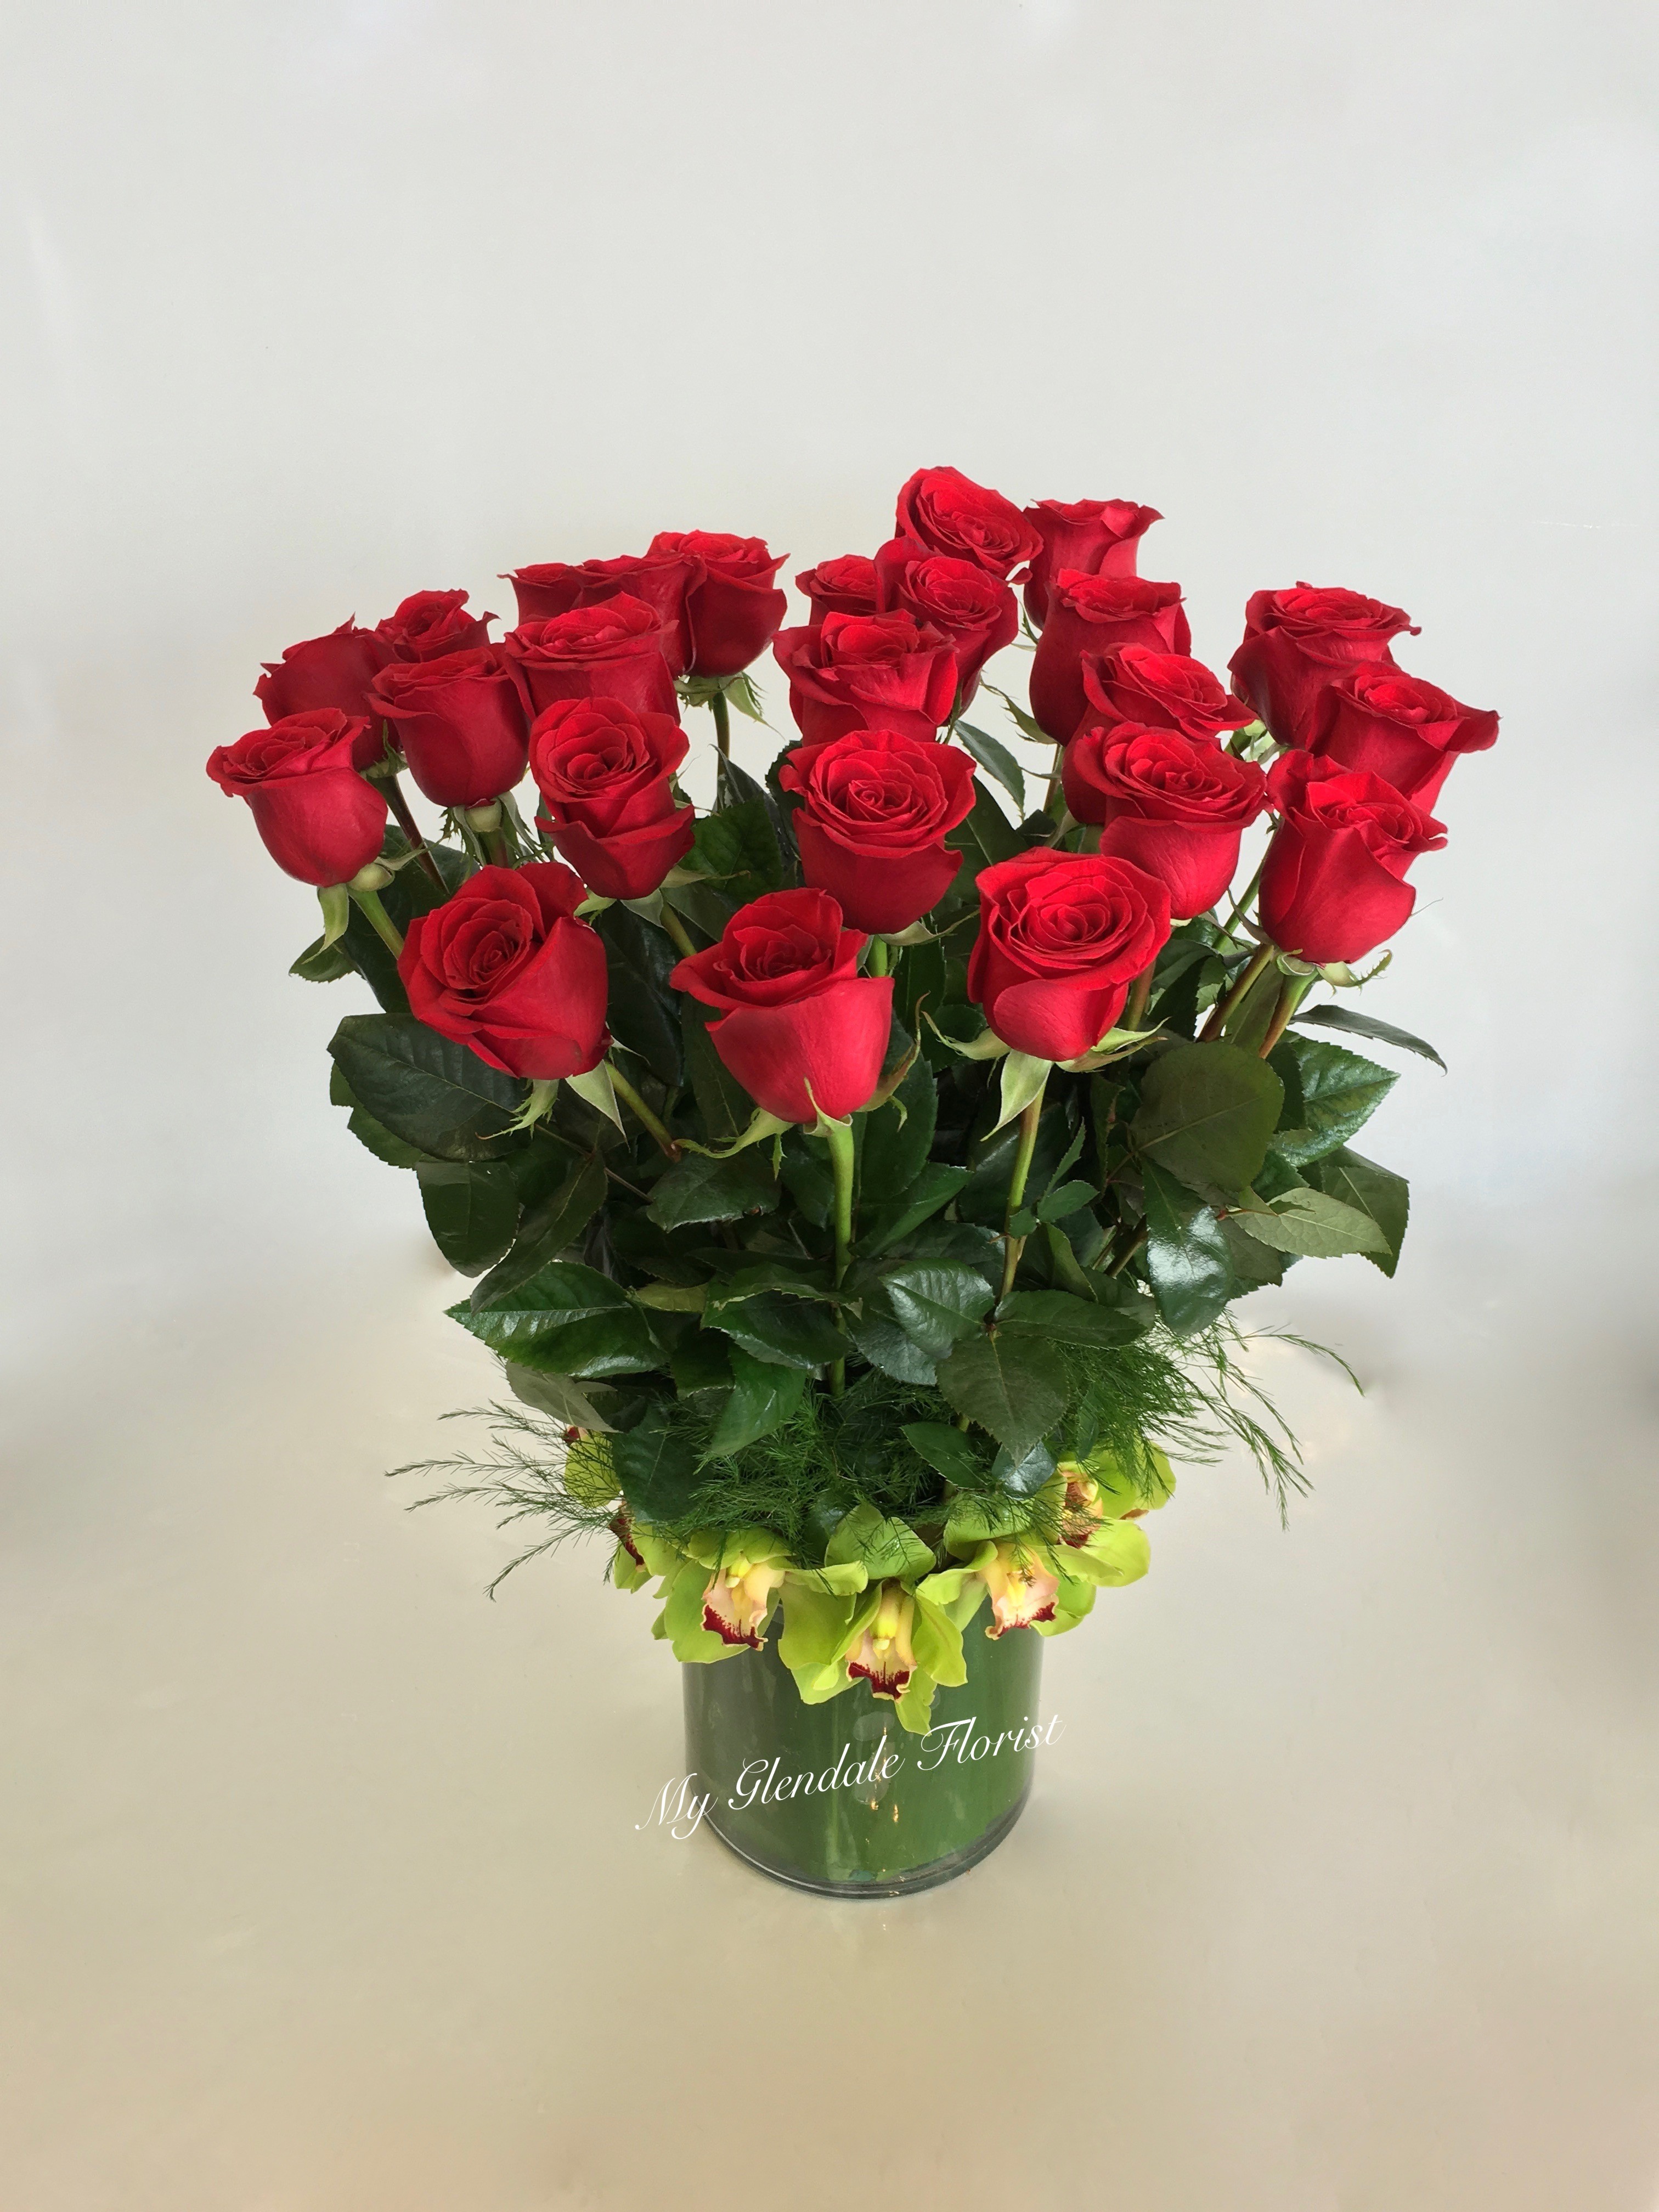 Two Dozen Red Roses and Orchids - Glendale Florist in Glendale, CA ...